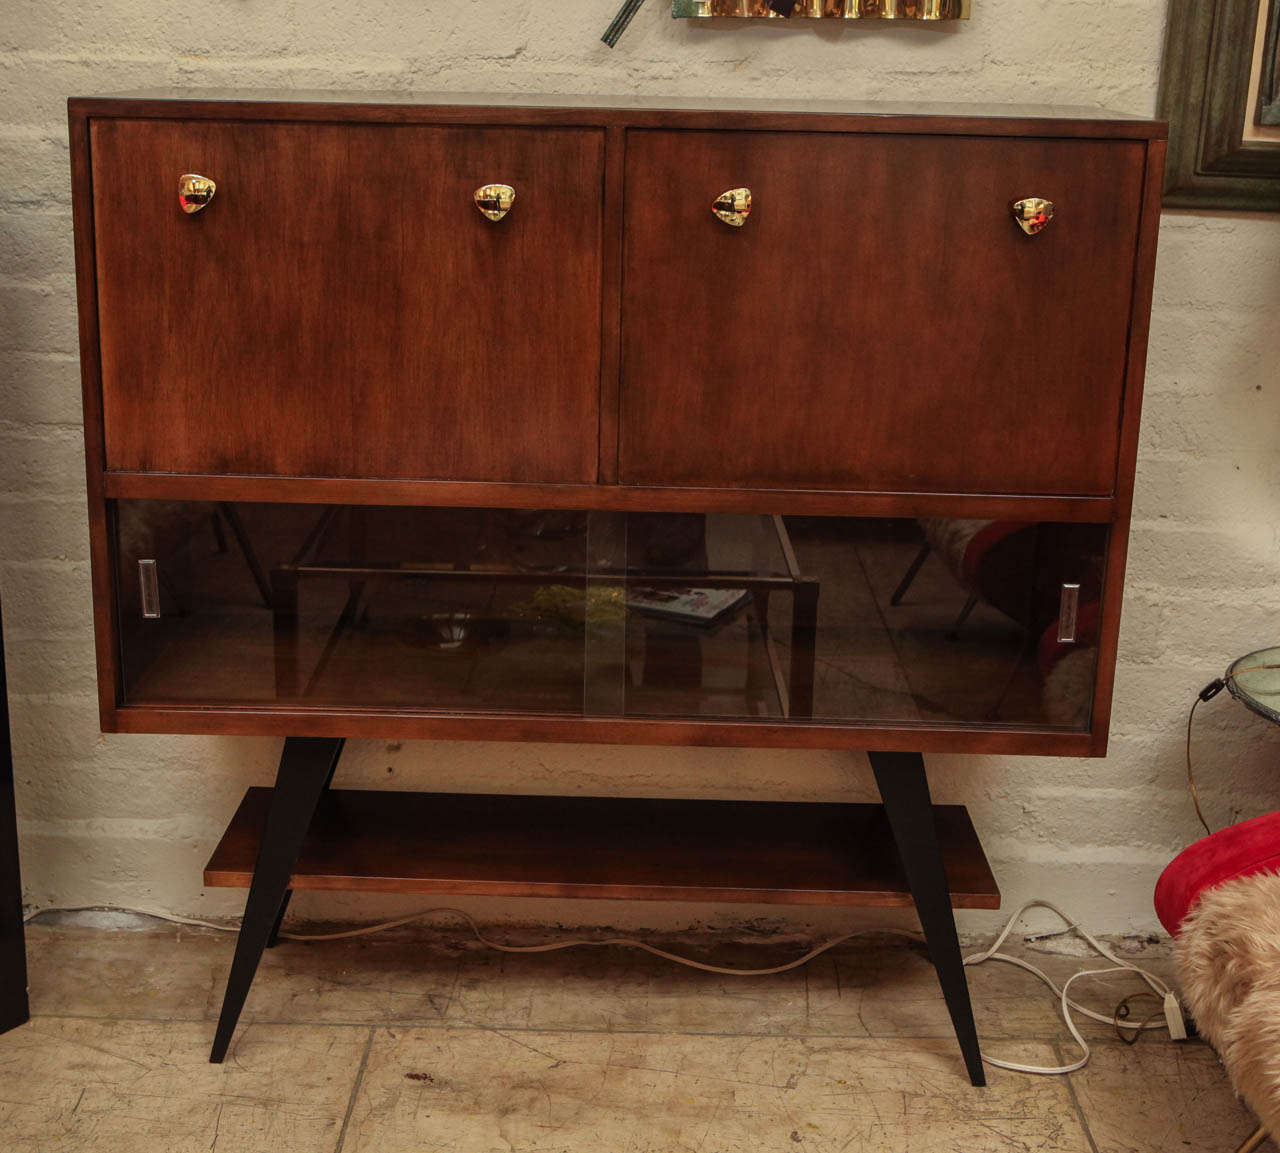 An amazing 1950s Italian dry bar or cabinet. Left door opens to a serving platform which can also be used a writing desk. Right side is for storage. Two sliding glass doors at the bottom for additional storage. Brass handles.